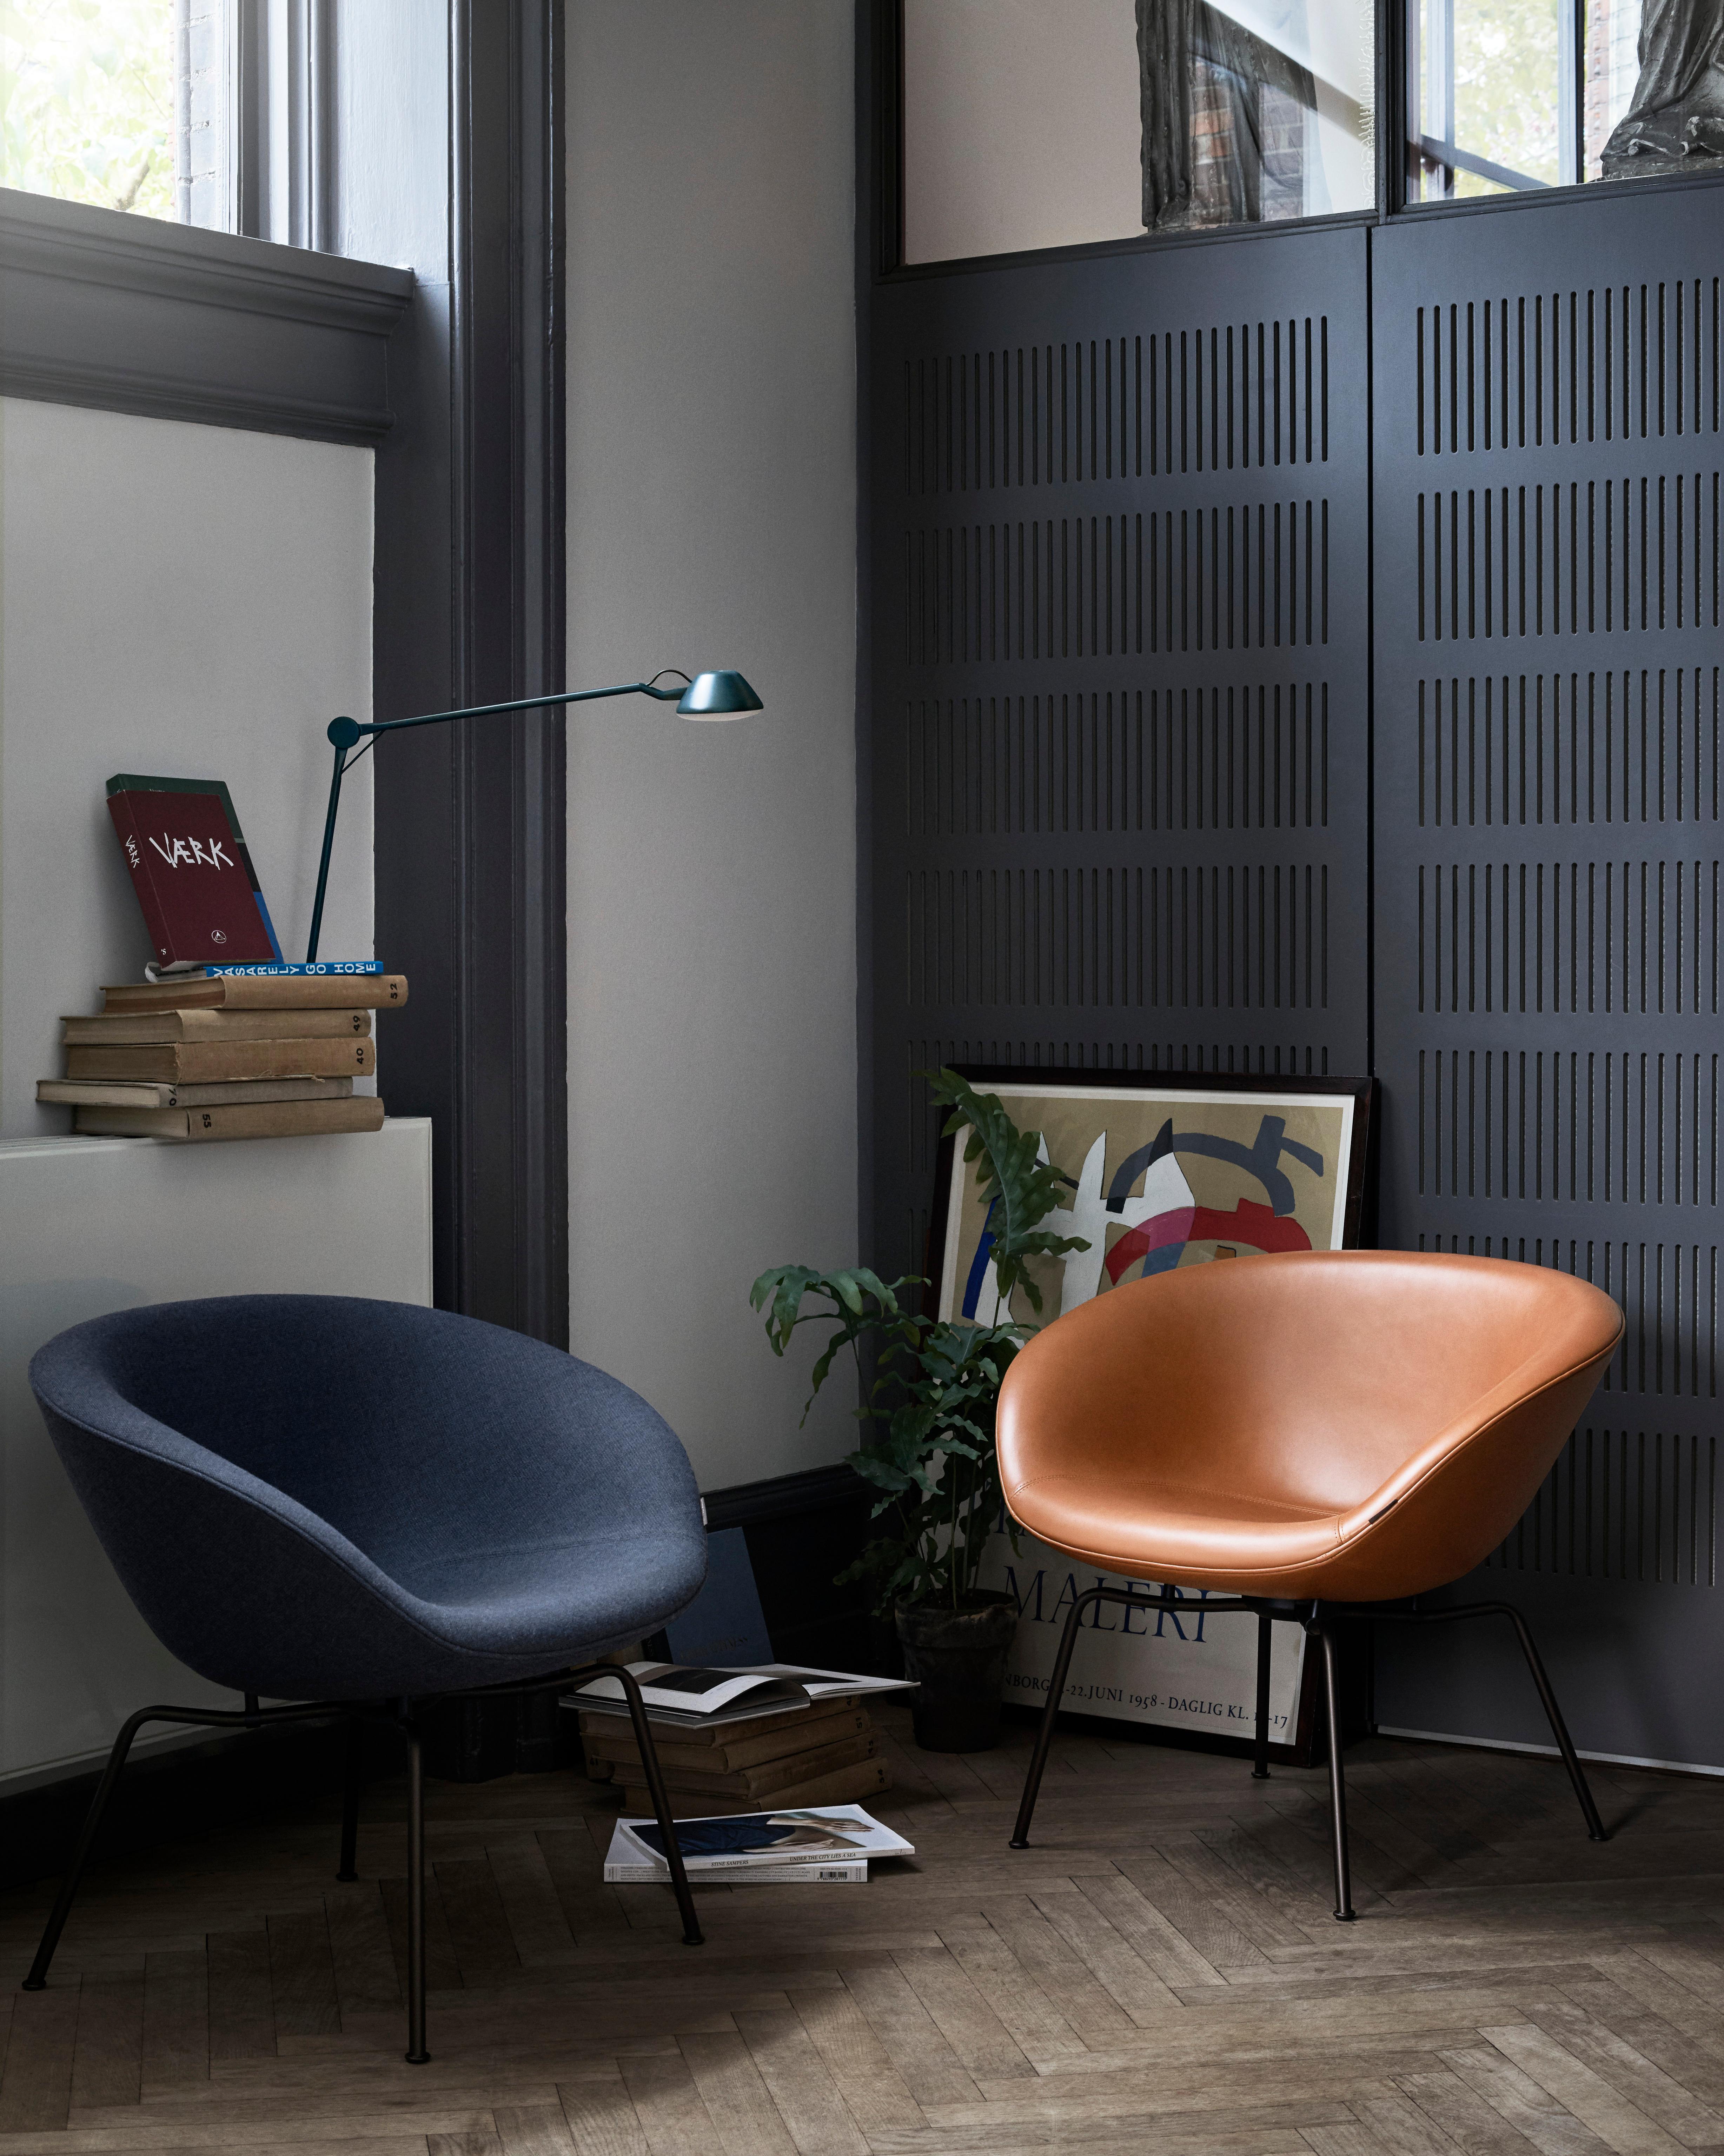 Anne Qvist 'AQ01' Table Lamp in Blue for Fritz Hansen For Sale 12